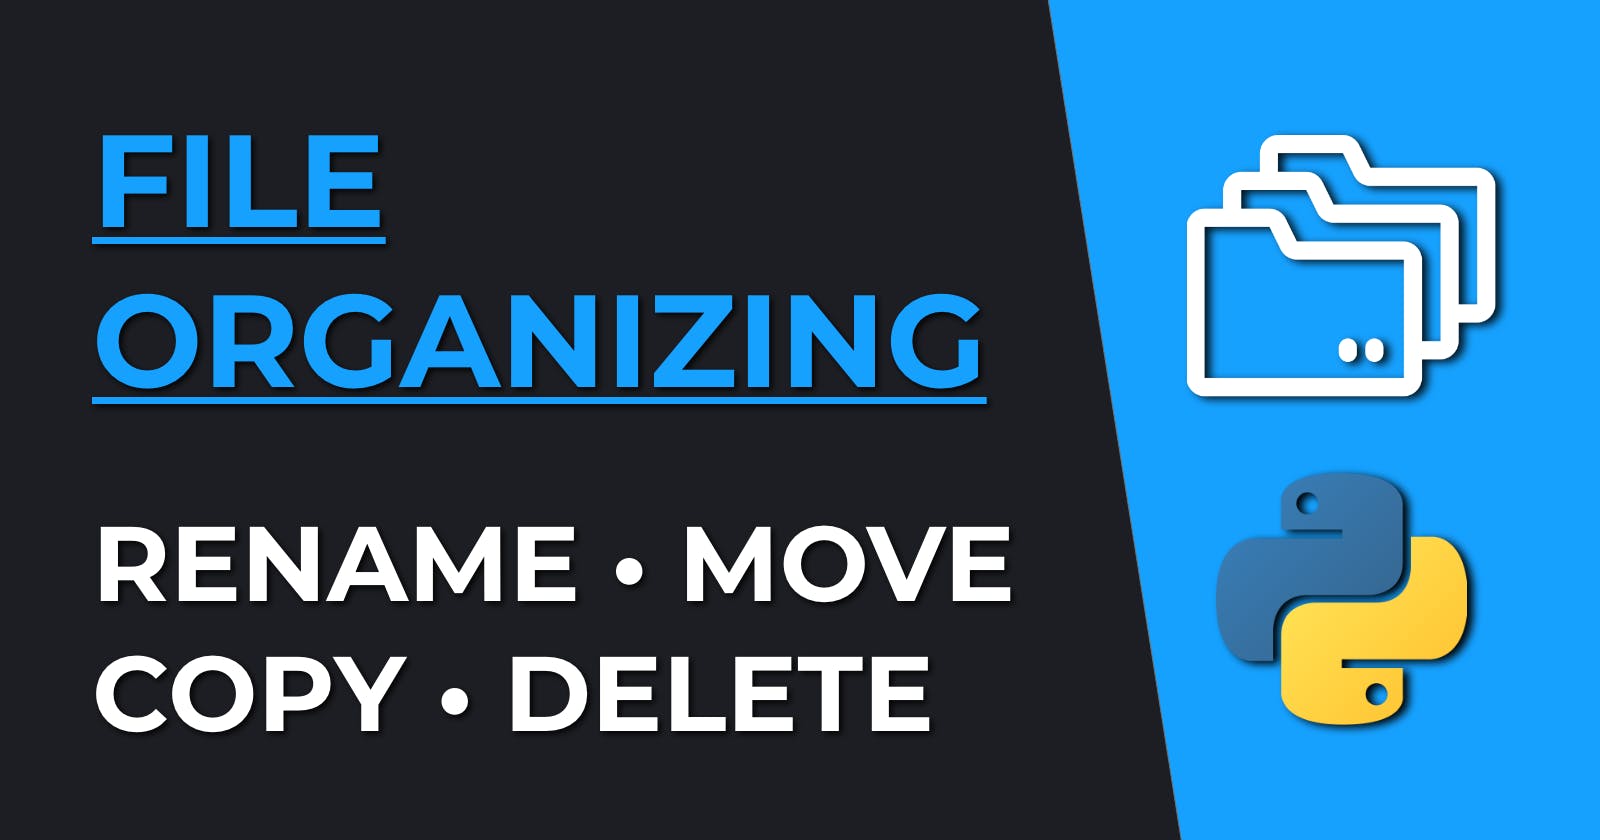 File Organizing with Python: Rename, Move, Copy & Delete Files and Folders